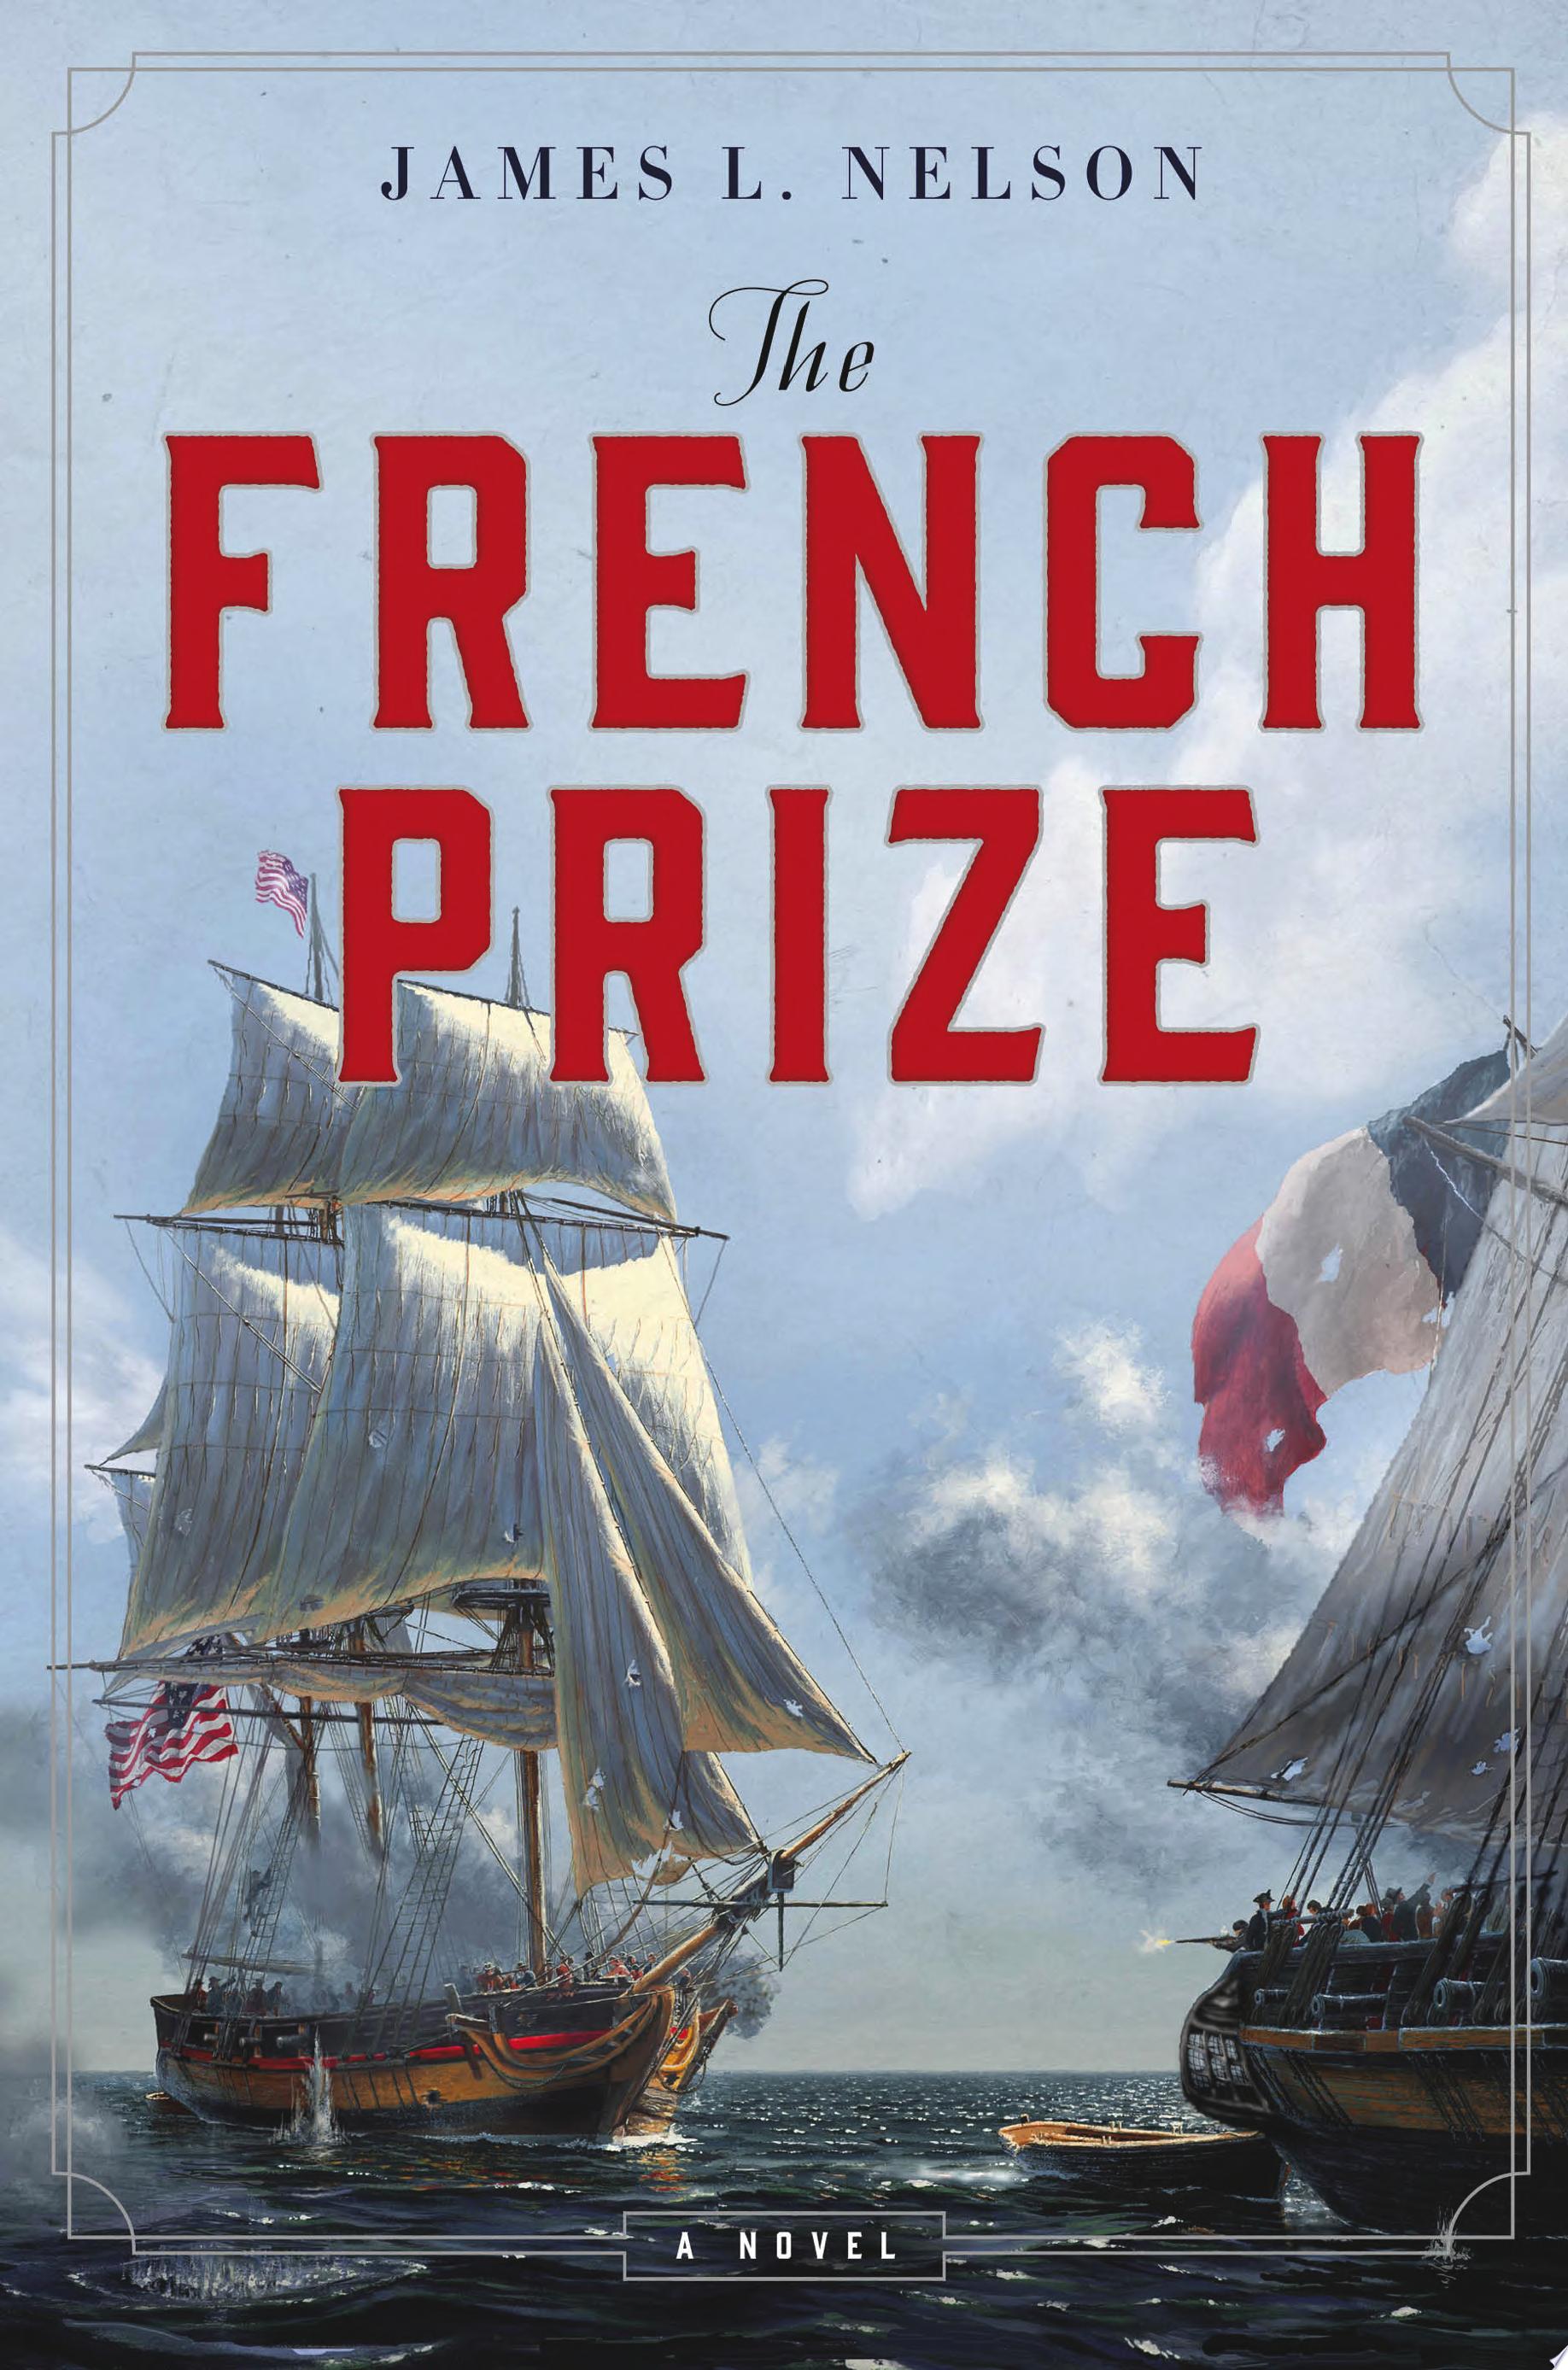 Image for "The French Prize"